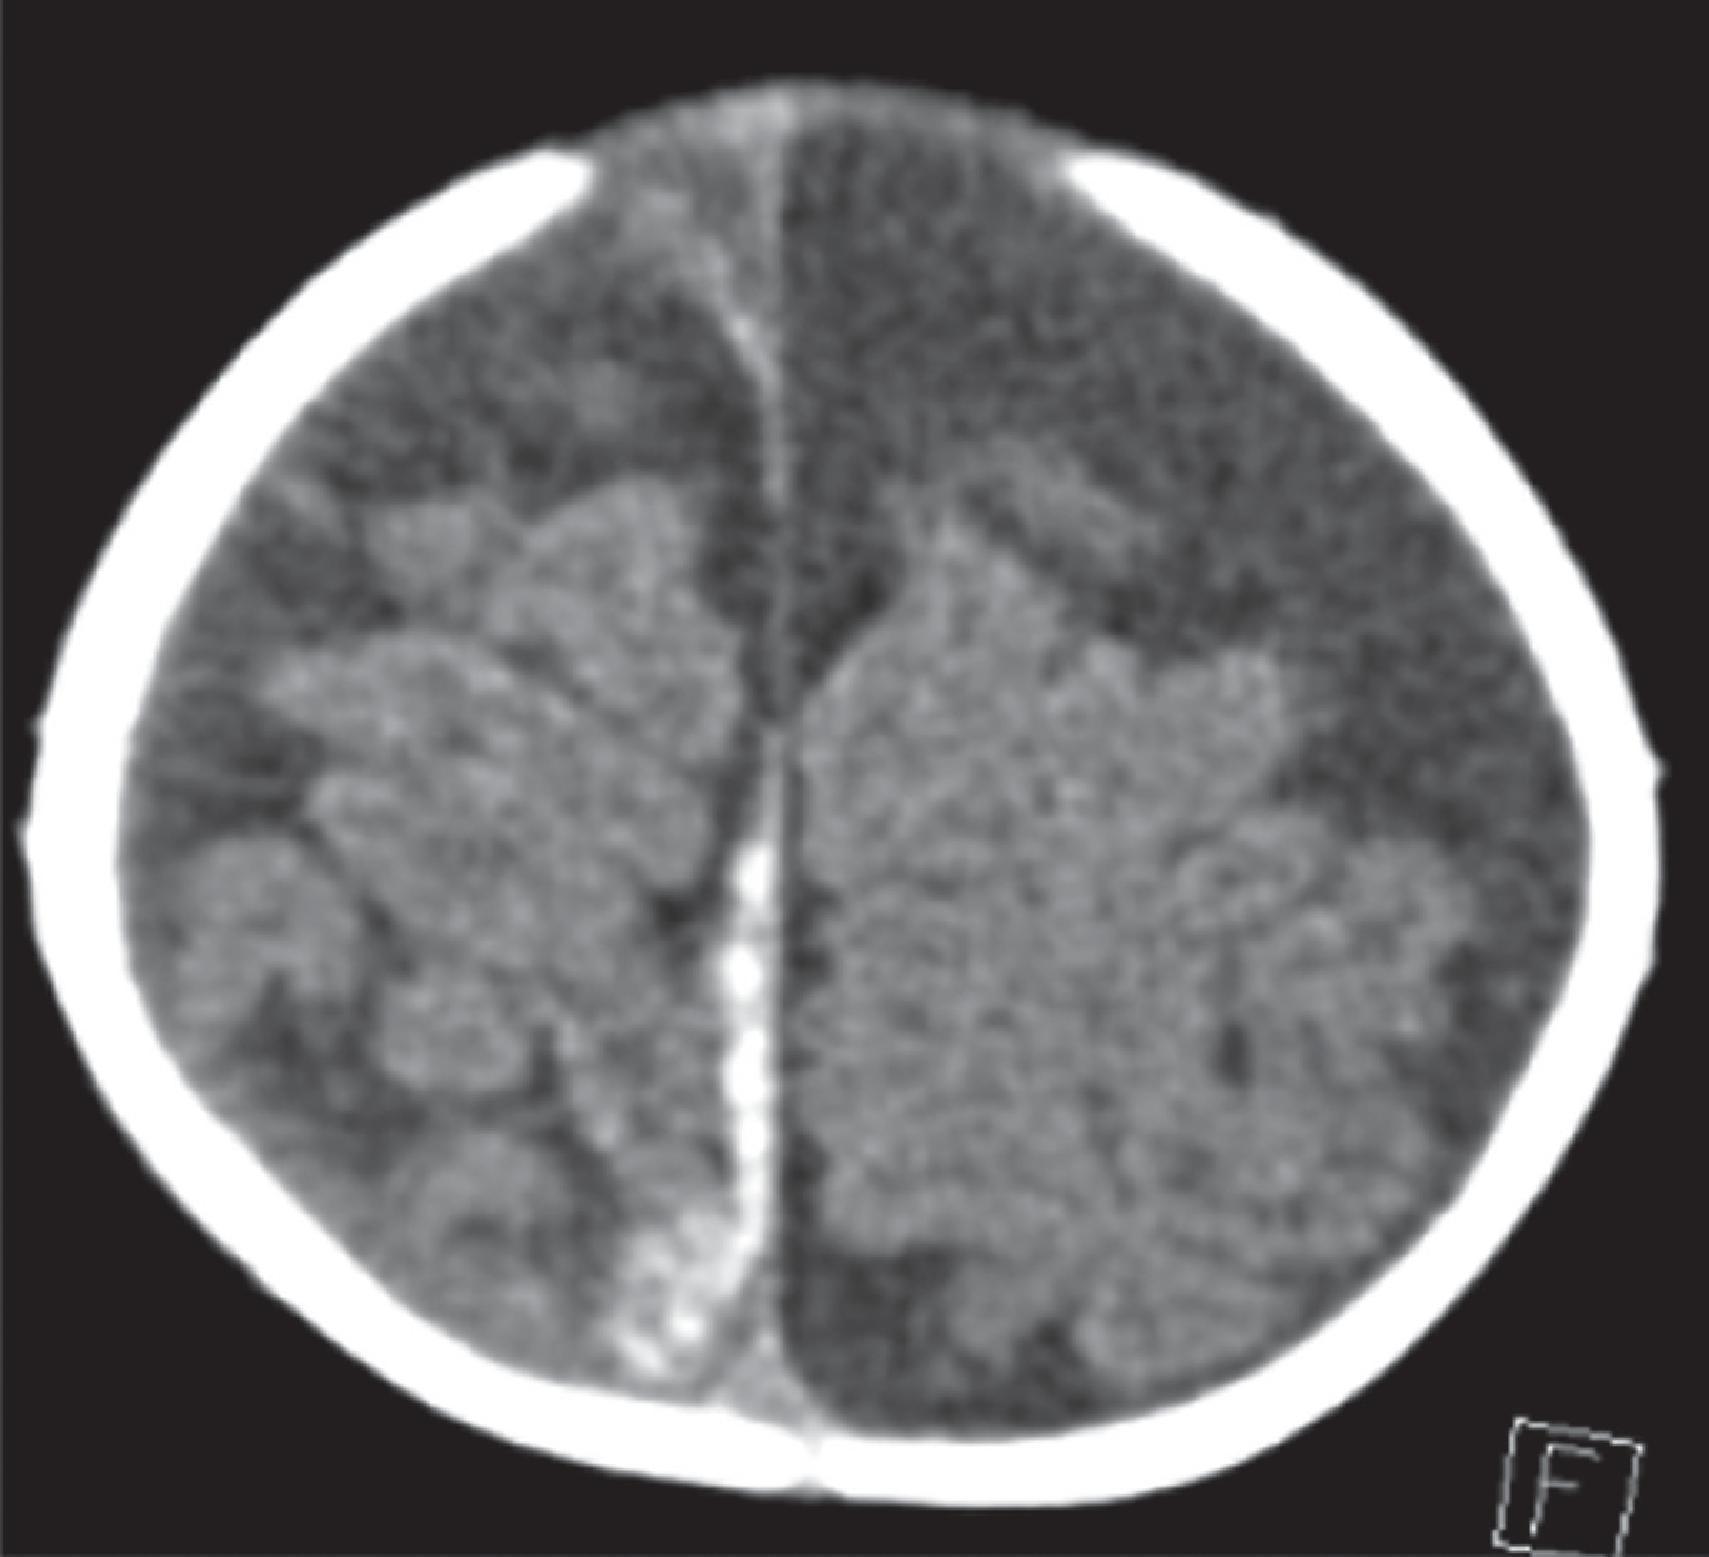 FIG. 2, Transverse head CT image in a 2-month-old boy showing an acute right posterior subdural hematoma secondary to non-accidental trauma.